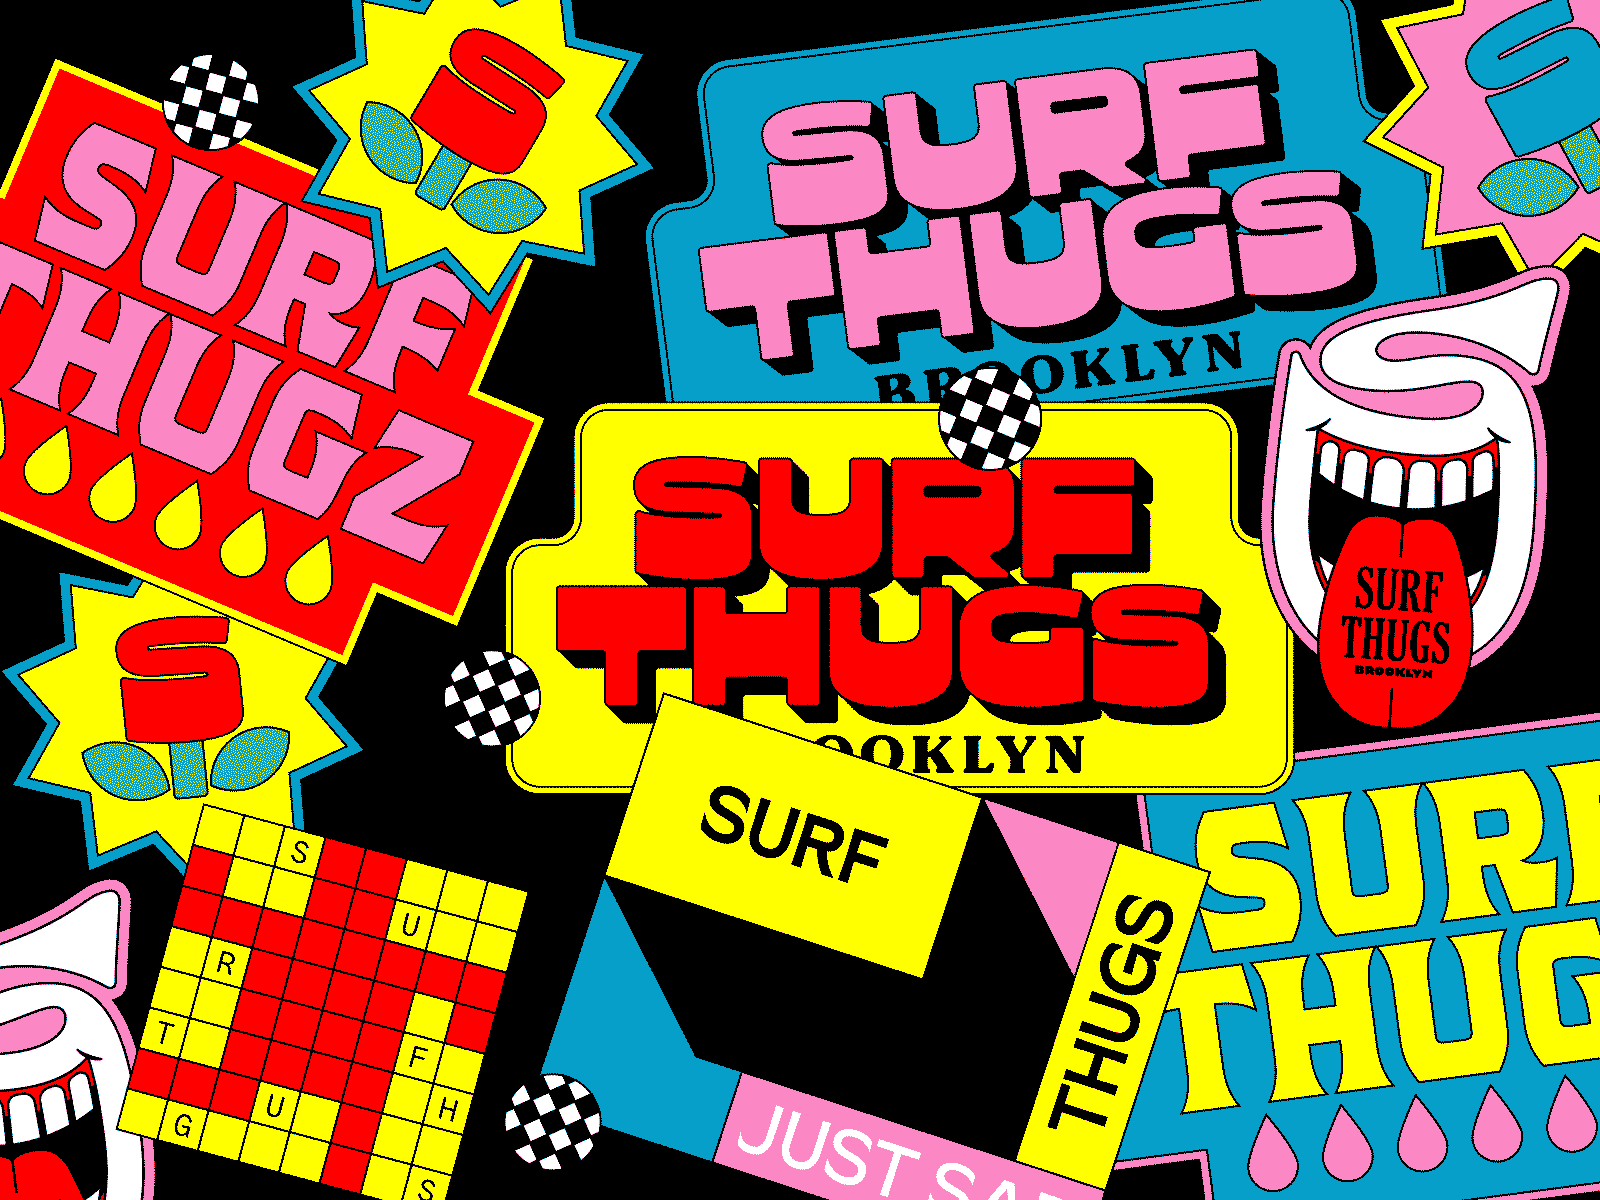 WEIRD checkers fun gif lettering retro stickers surf type videogames